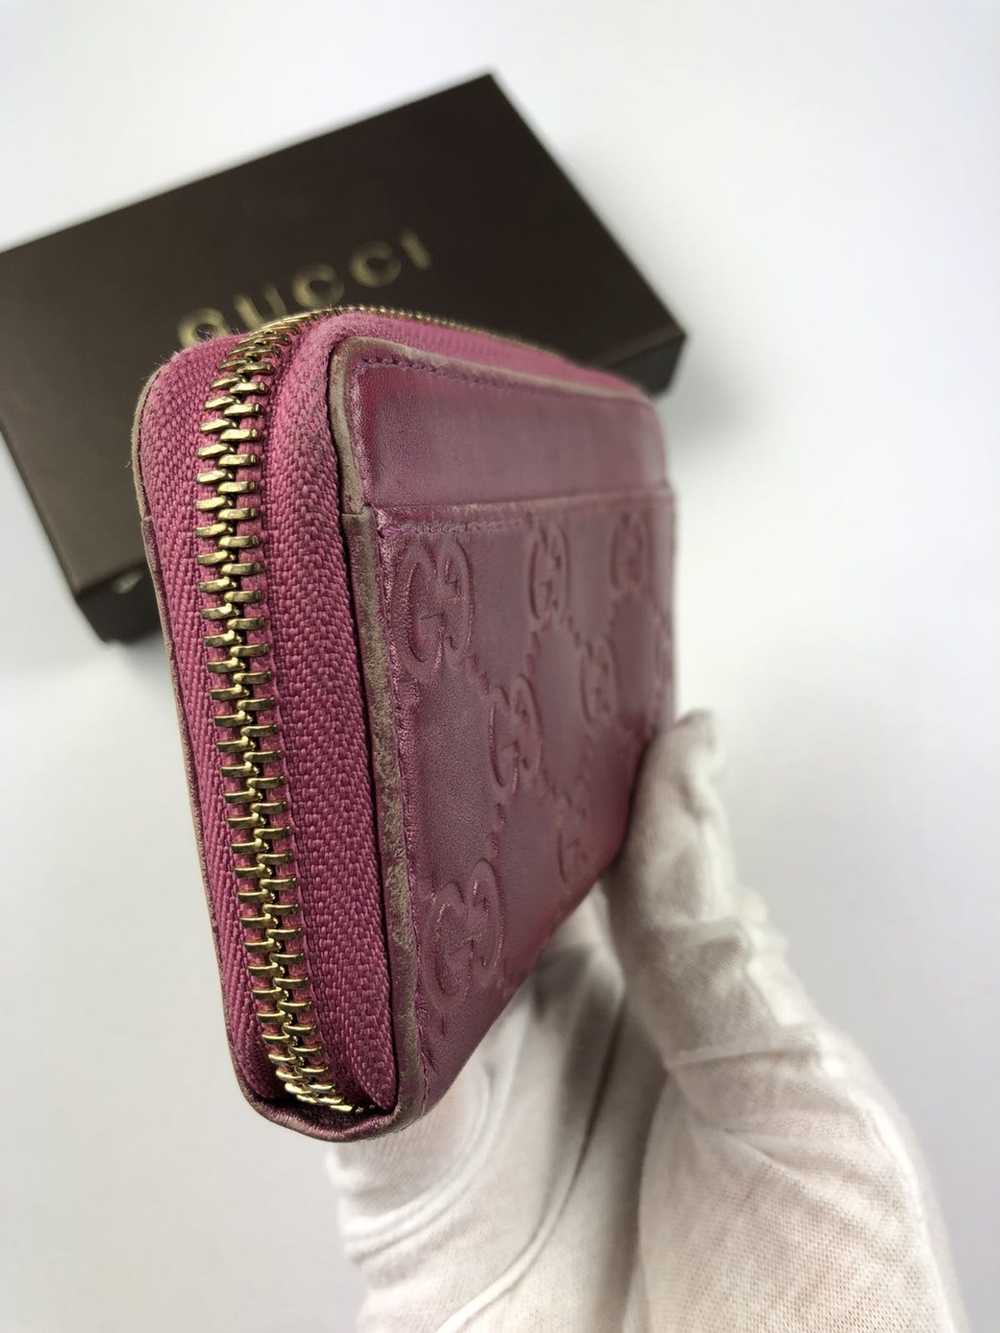 Gucci Gucci gg guccissima leather cles wallet - image 4